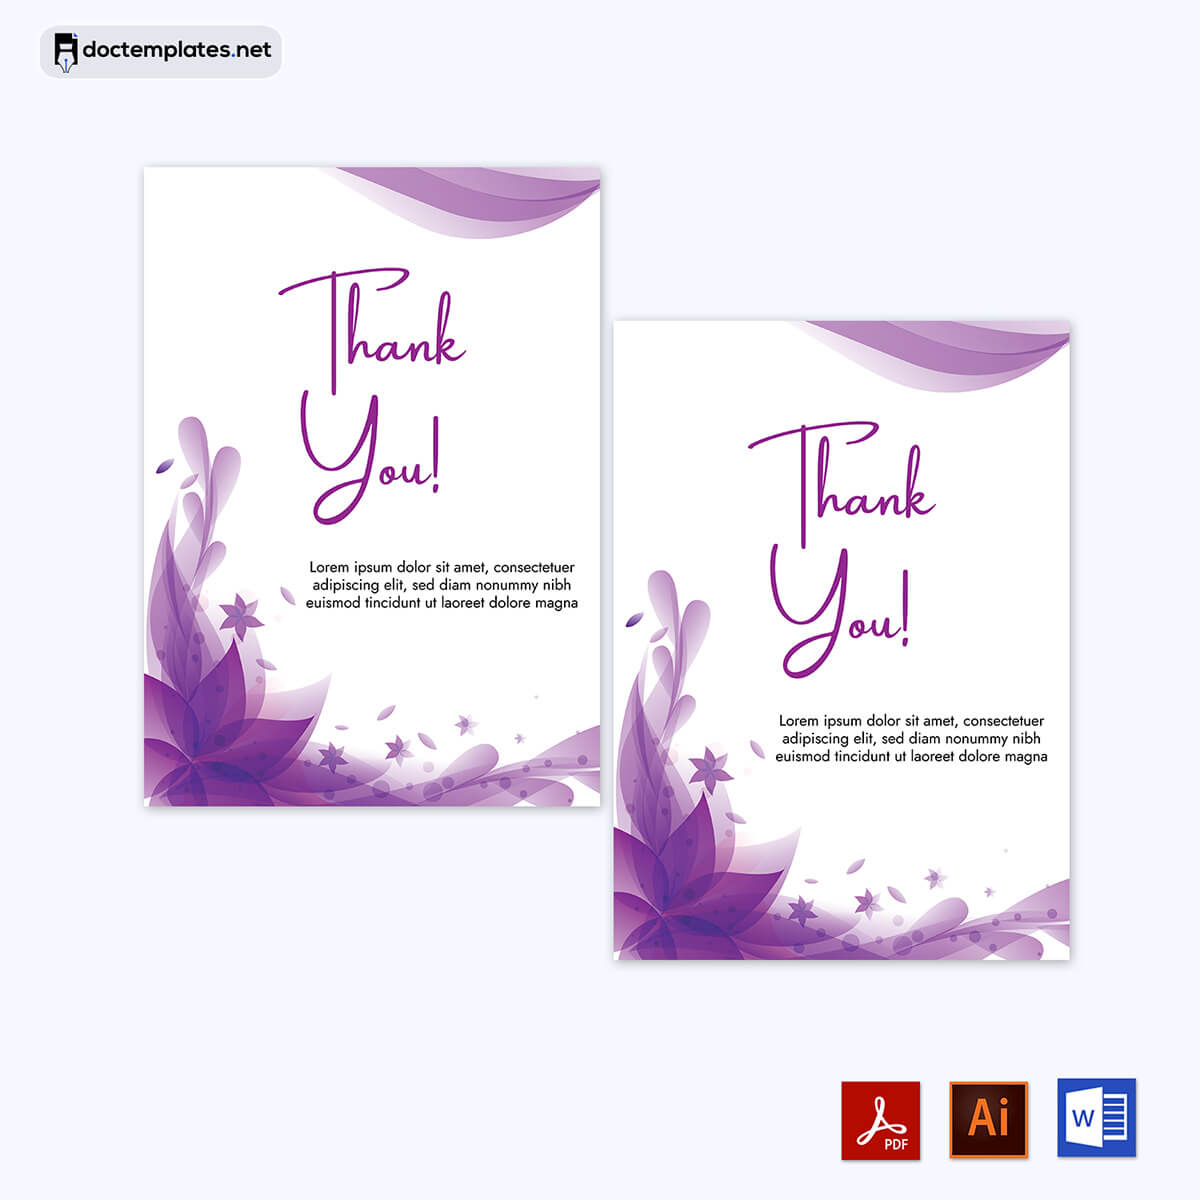 Image of Thank you card format
Thank you card format
